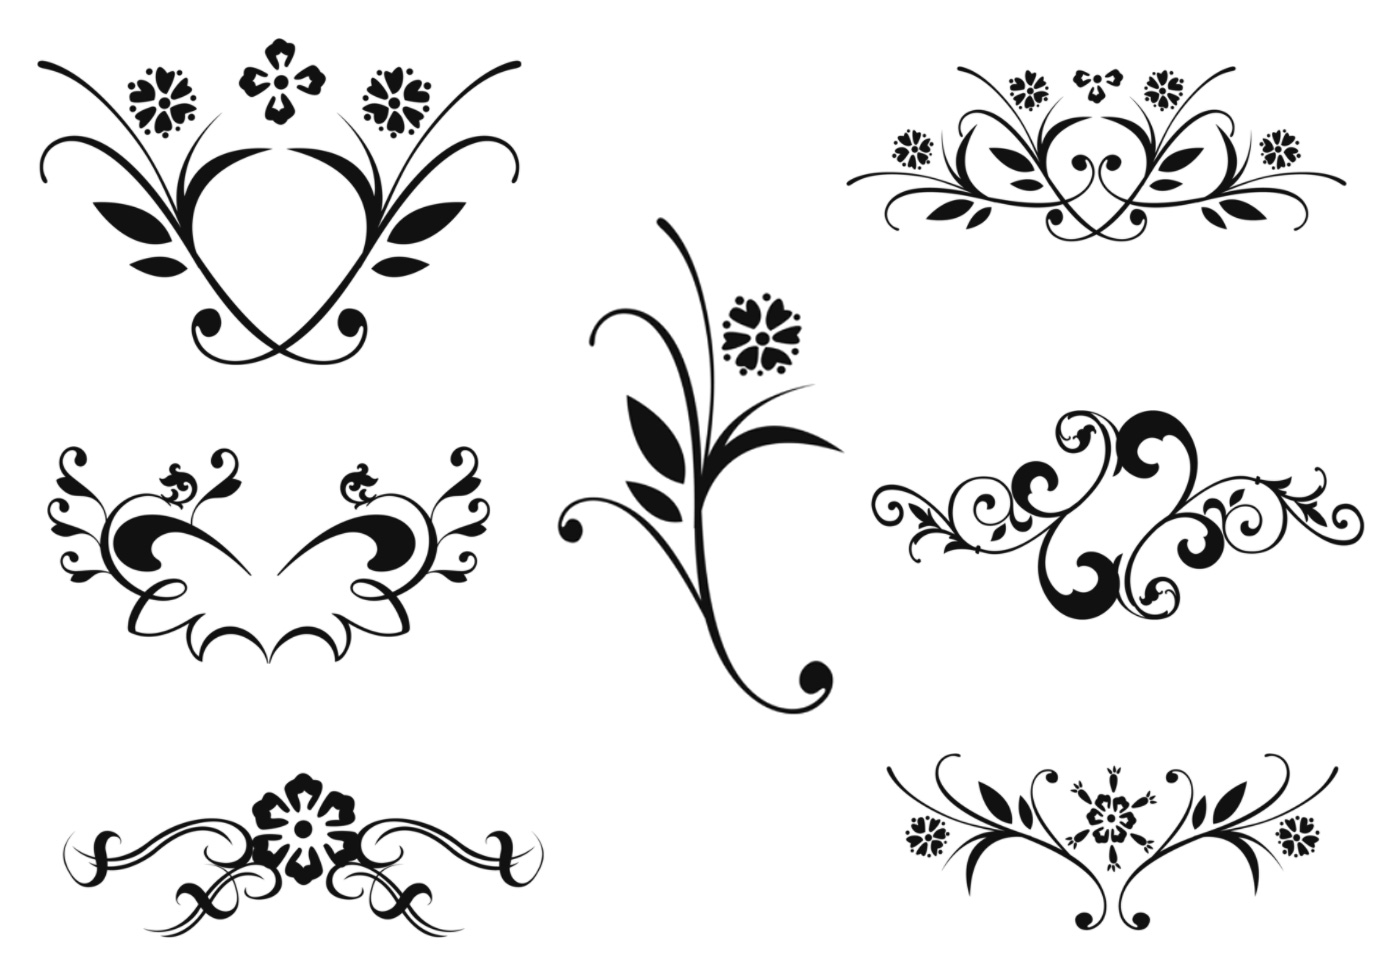 Download Floral Ornaments Vector Pack Two - Download Free Vectors ...